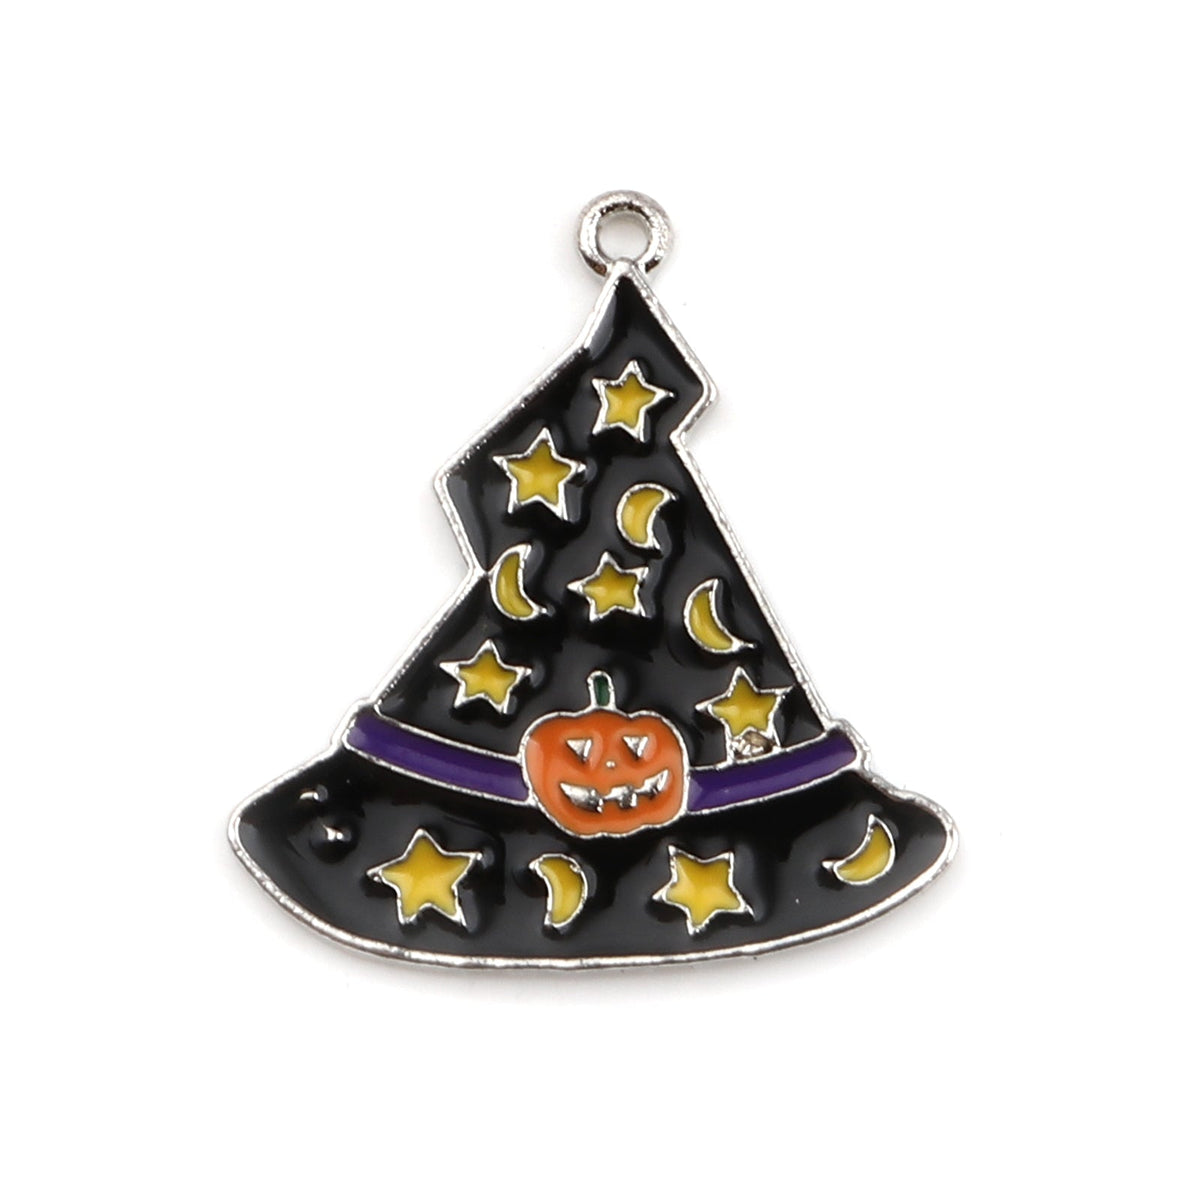 10pcs Cute Unique Witch Hat Charms Pendant Alloy Halloween Charms Antique  Silver Wizard Hat Beads Accessories For DIY Jewelry Making Finding Crafts Ea